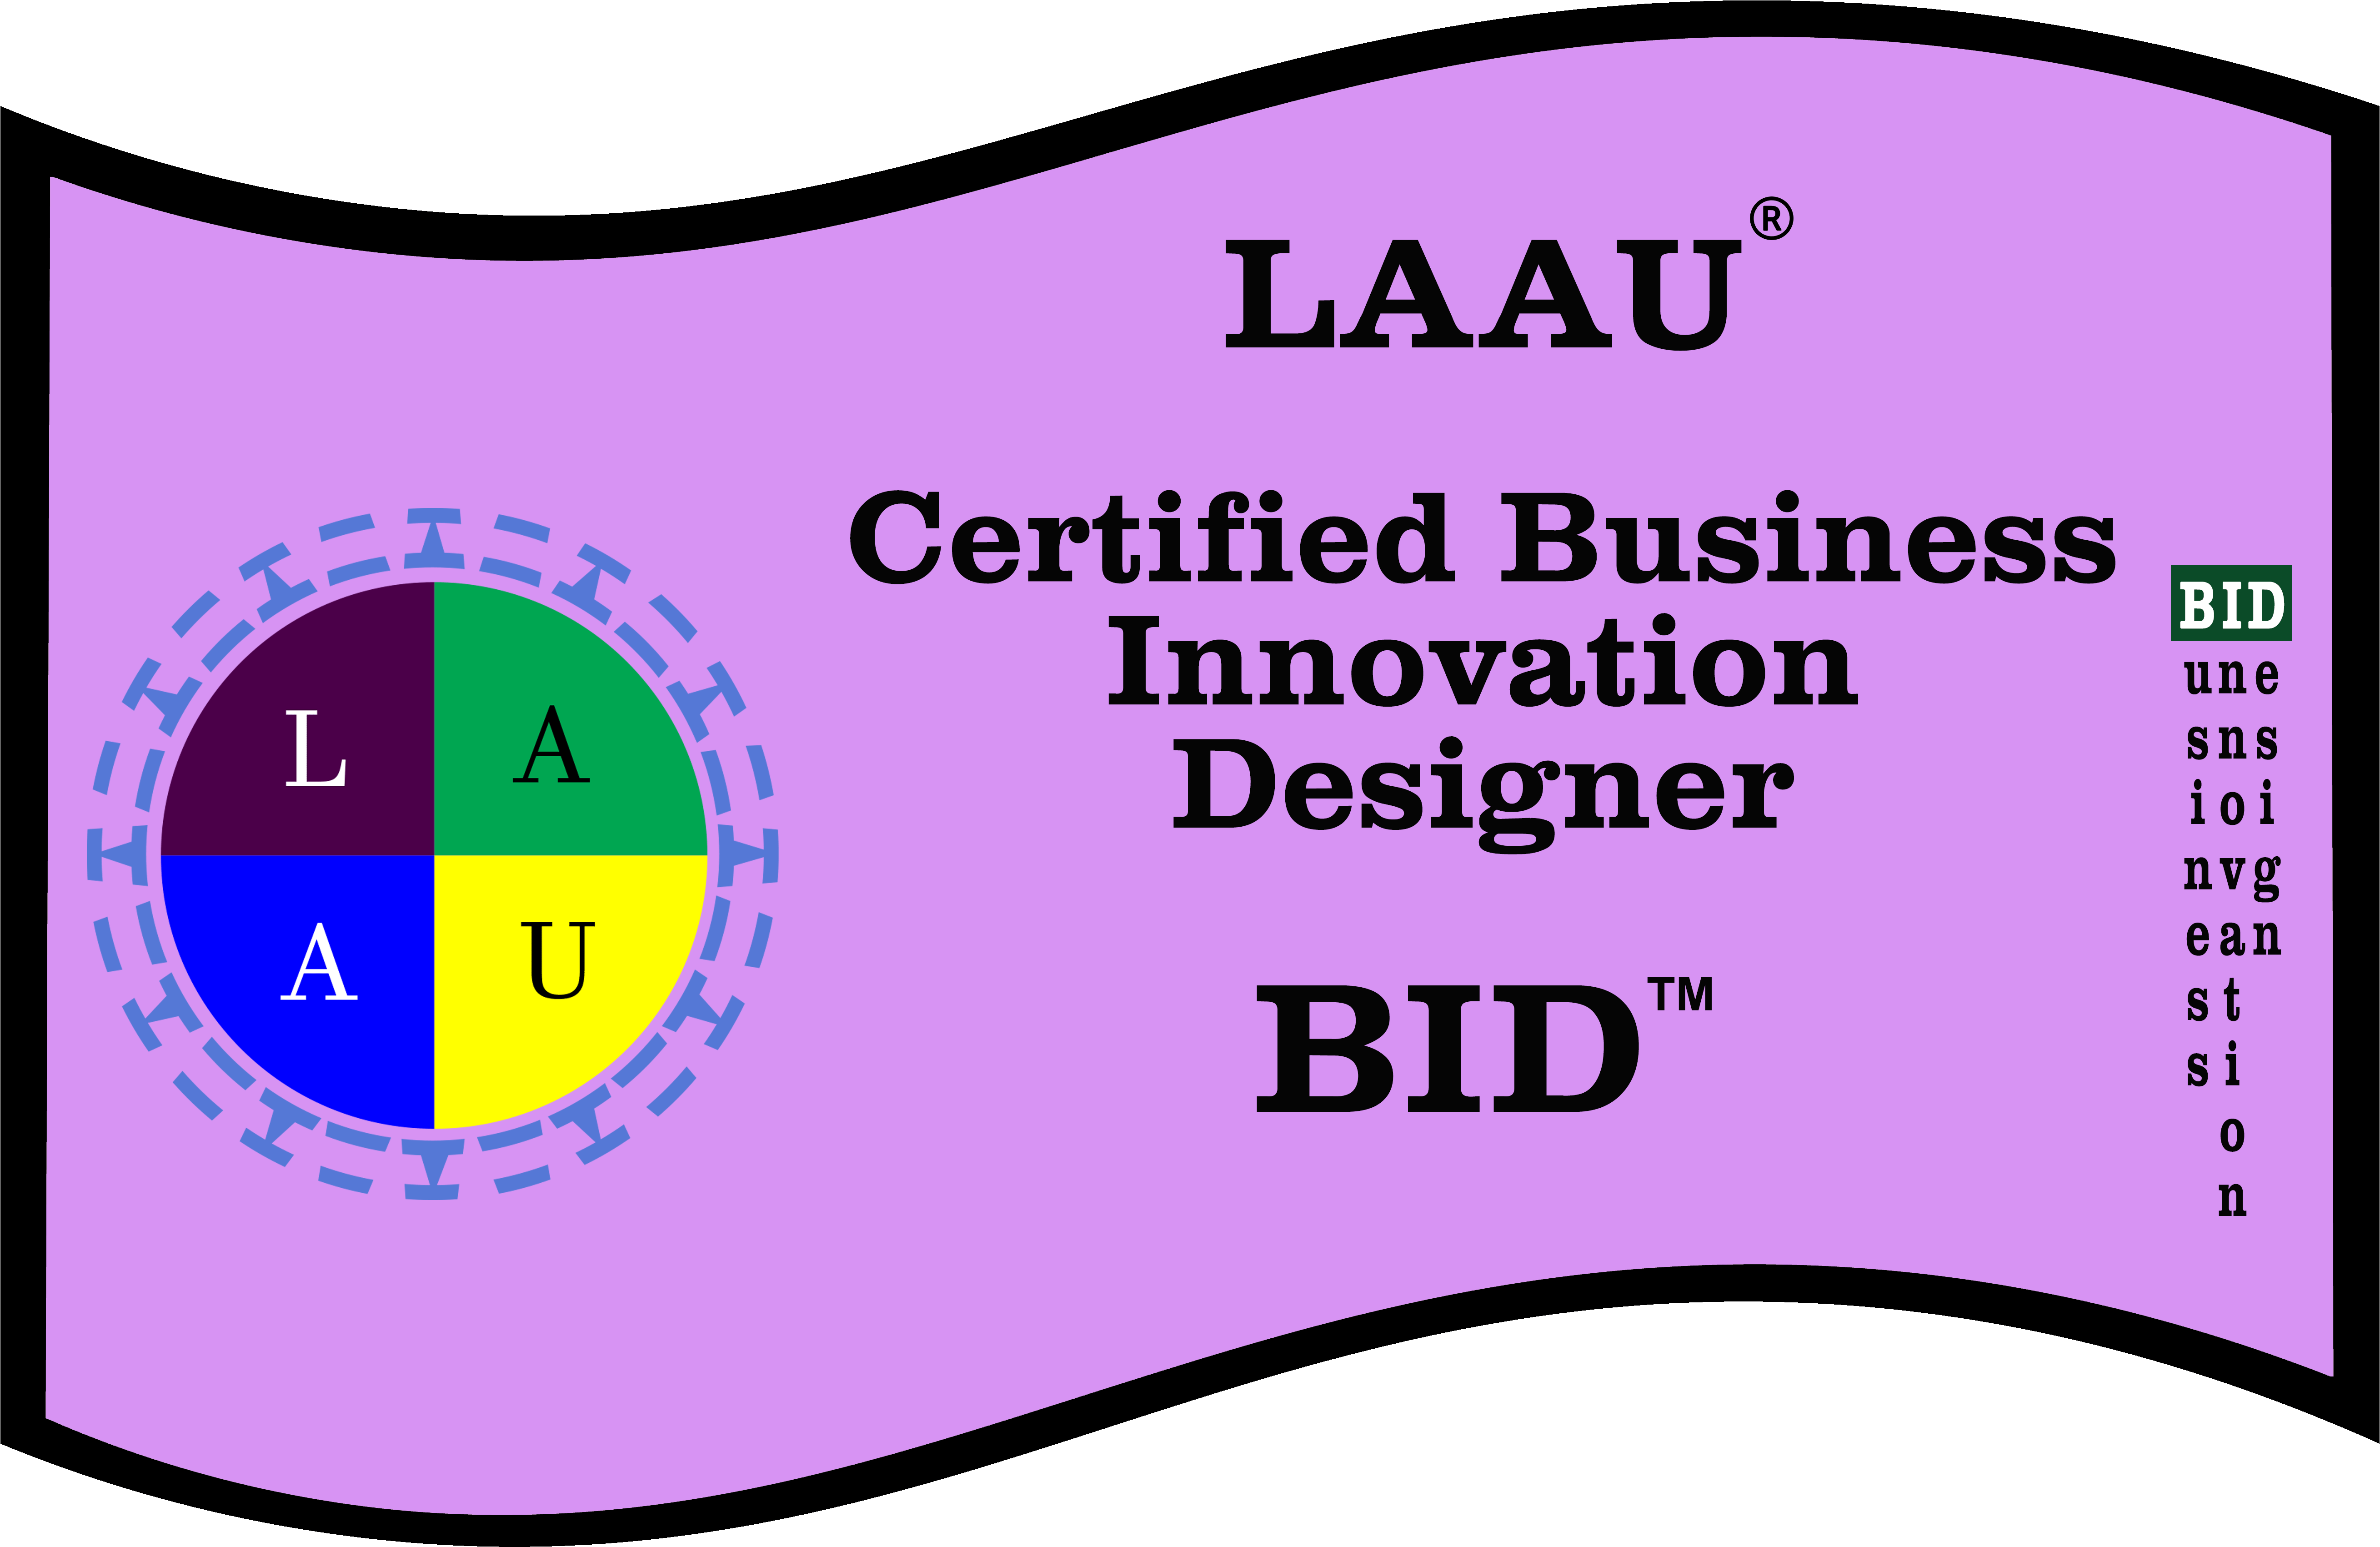 Attending the Two Day actionable guidance from an LAAU Accredited Trainer qualifies you to receive the Business Innovation Designer Credentials from the LAAU